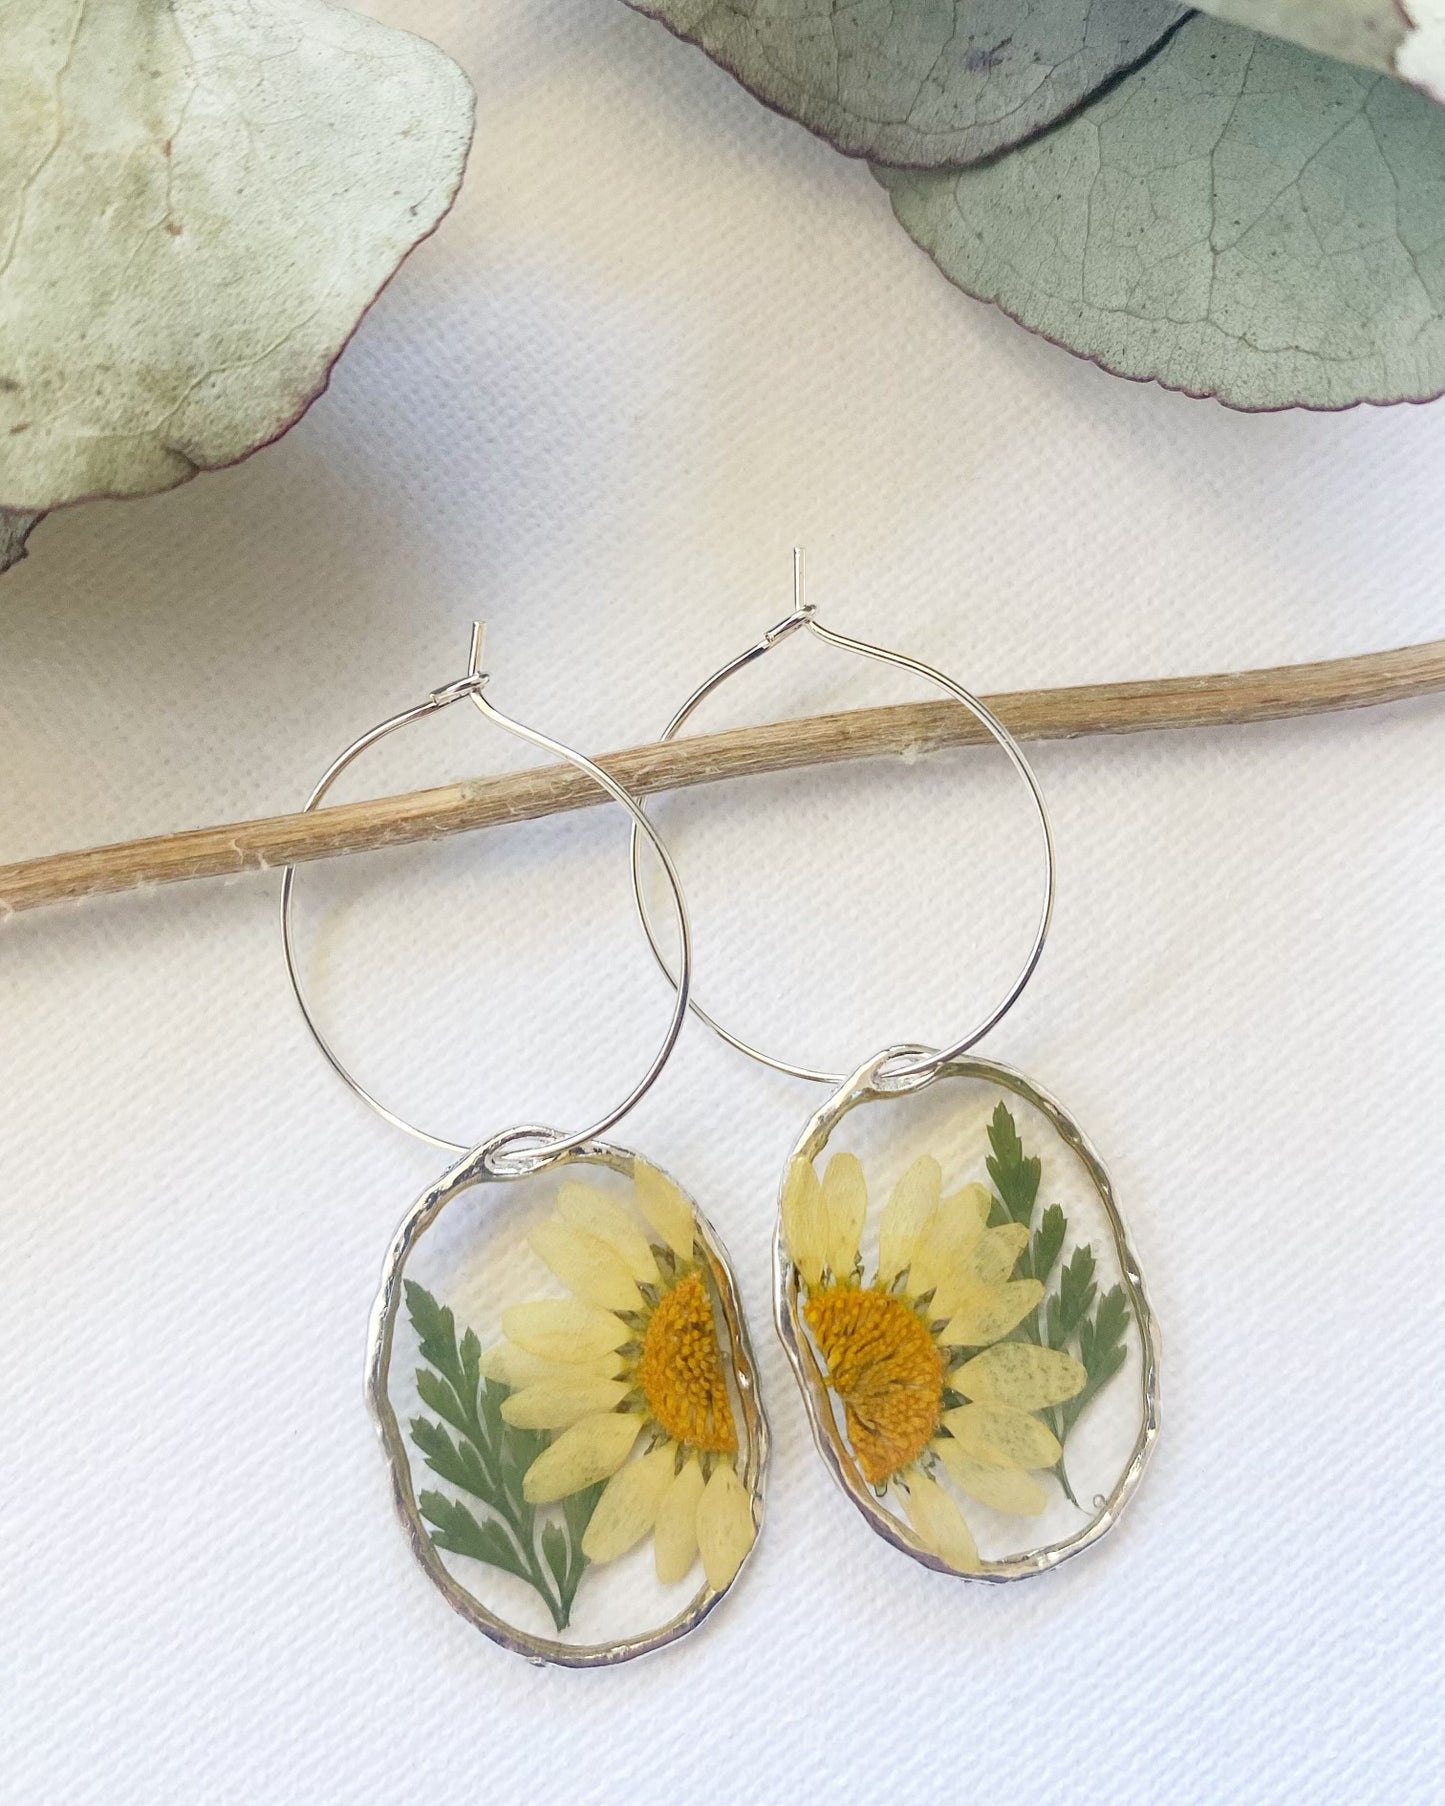 Pressed Yellow Daisy and Fern Earrings